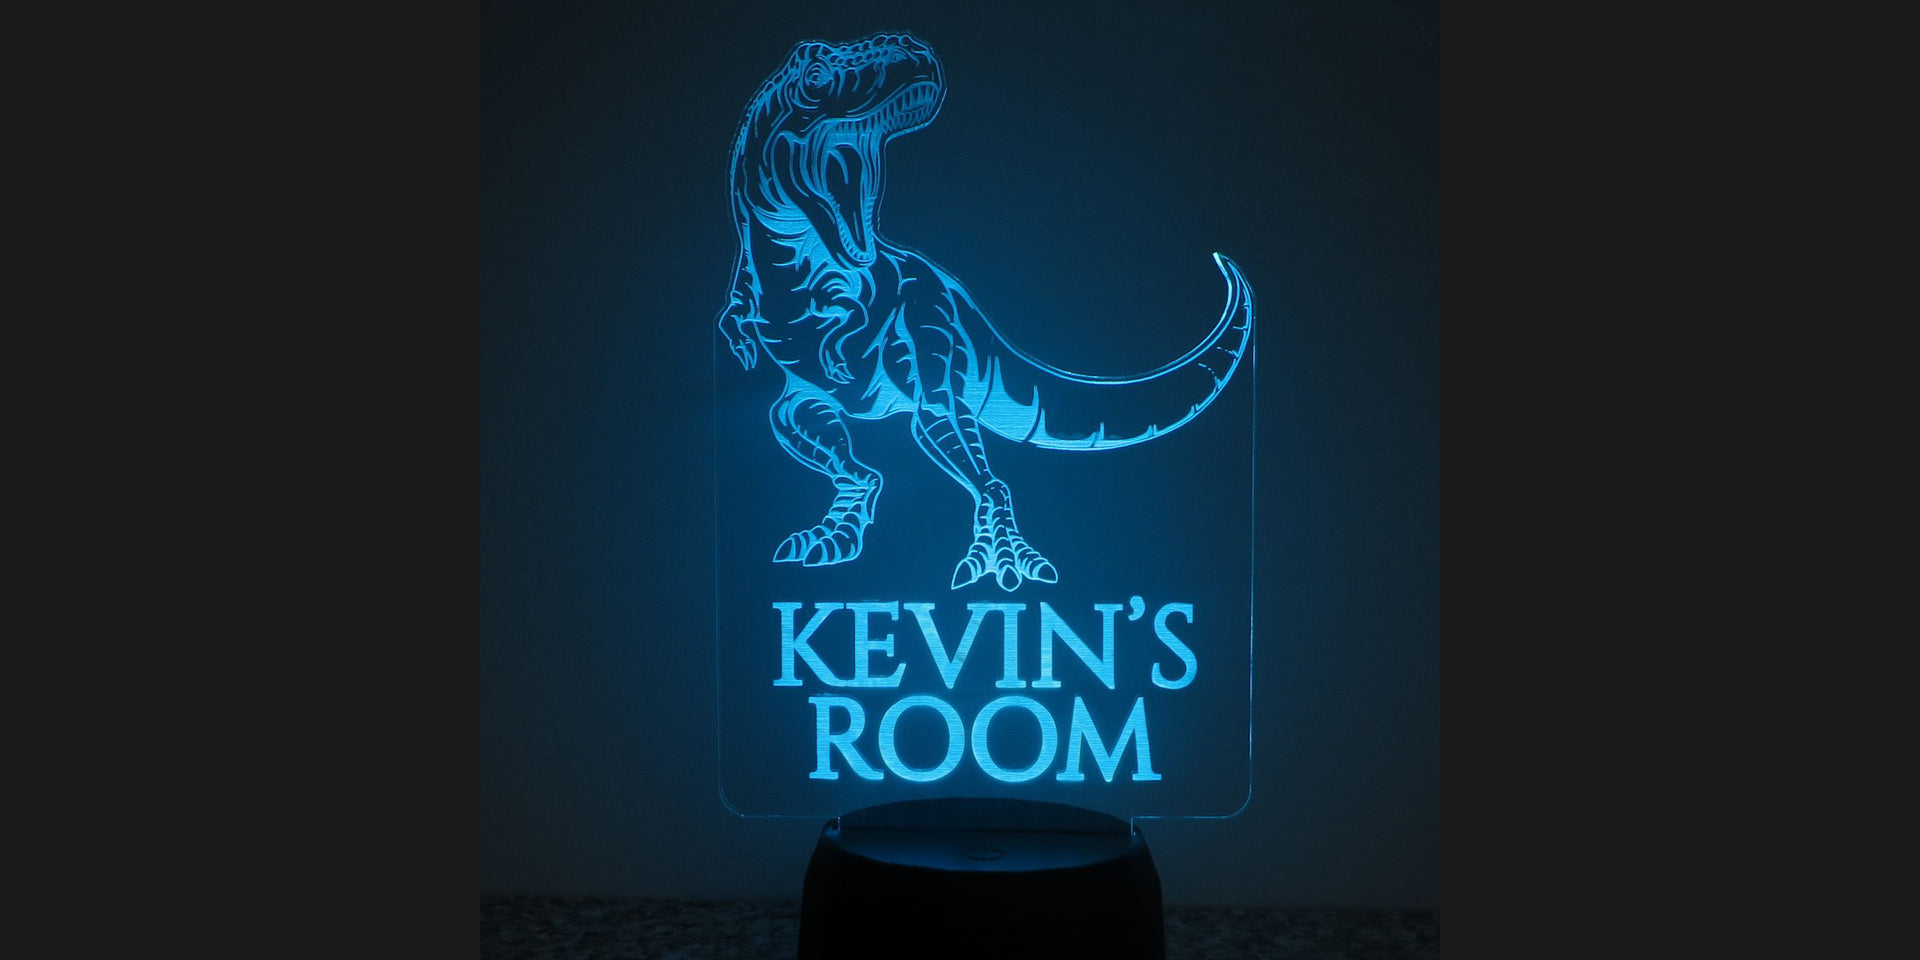 Load video: Watch the changing colors of the T-rex LED night light.